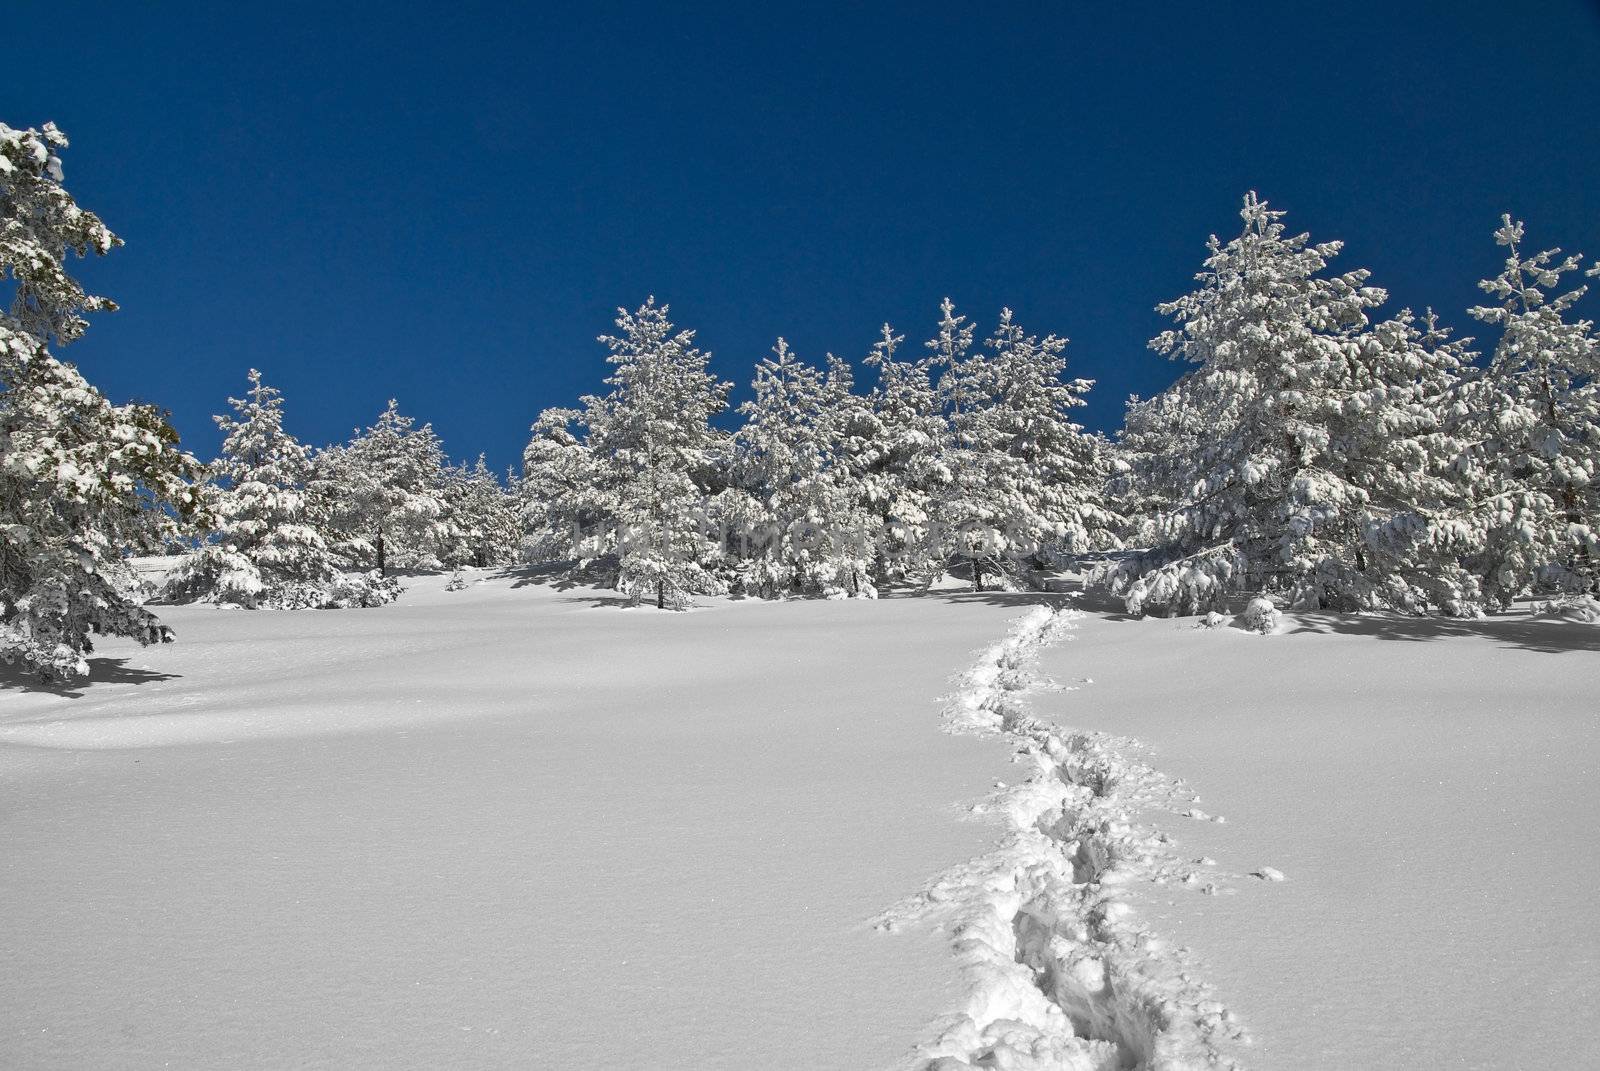 Footpath in snow, sunny day at mountain, winter, forest